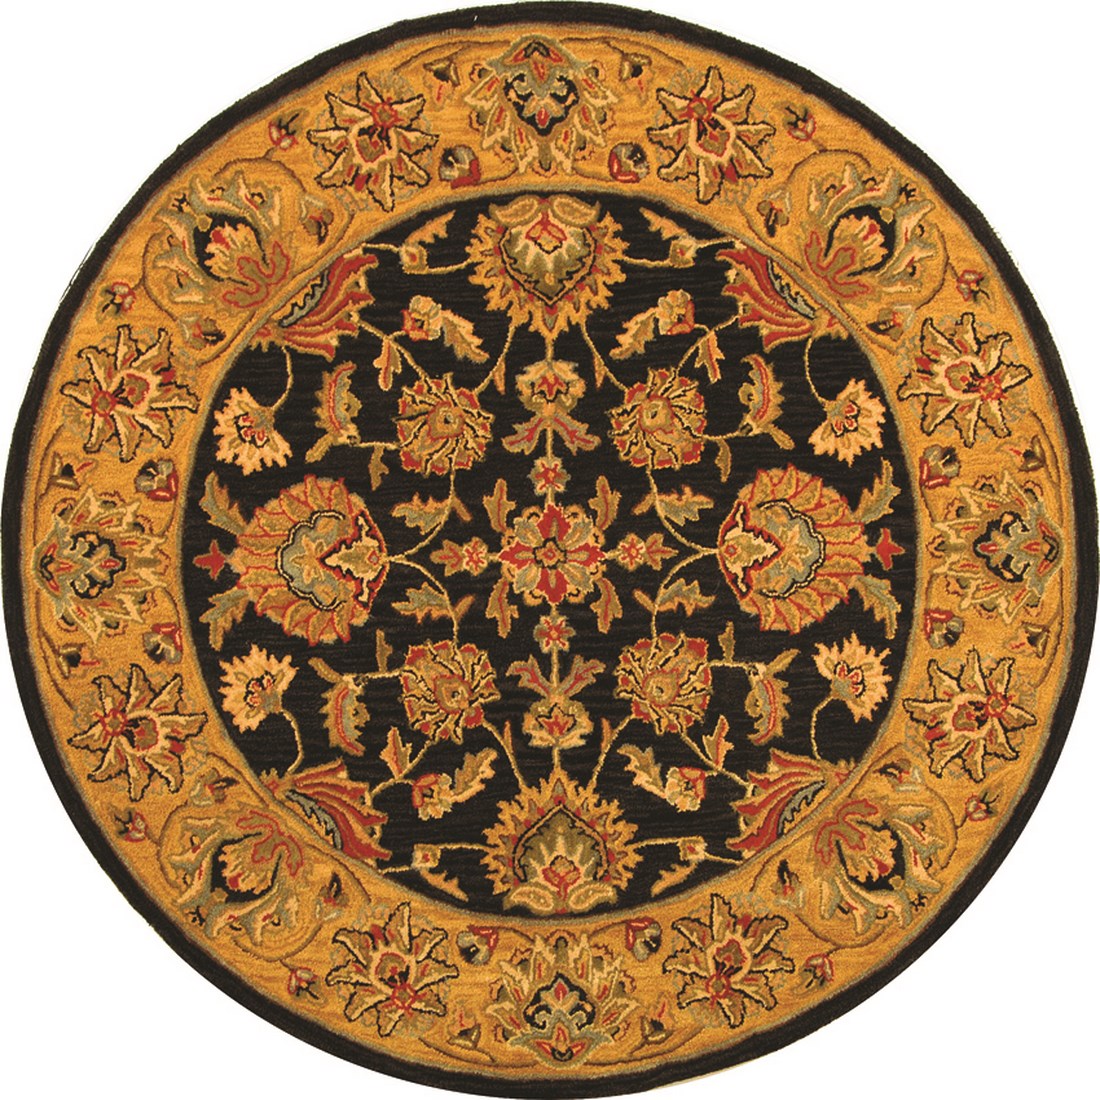 SAFAVIEH Heritage Regis Traditional Wool Area Rug, Charcoal/Gold, 3'6" x 3'6" Round - image 1 of 10